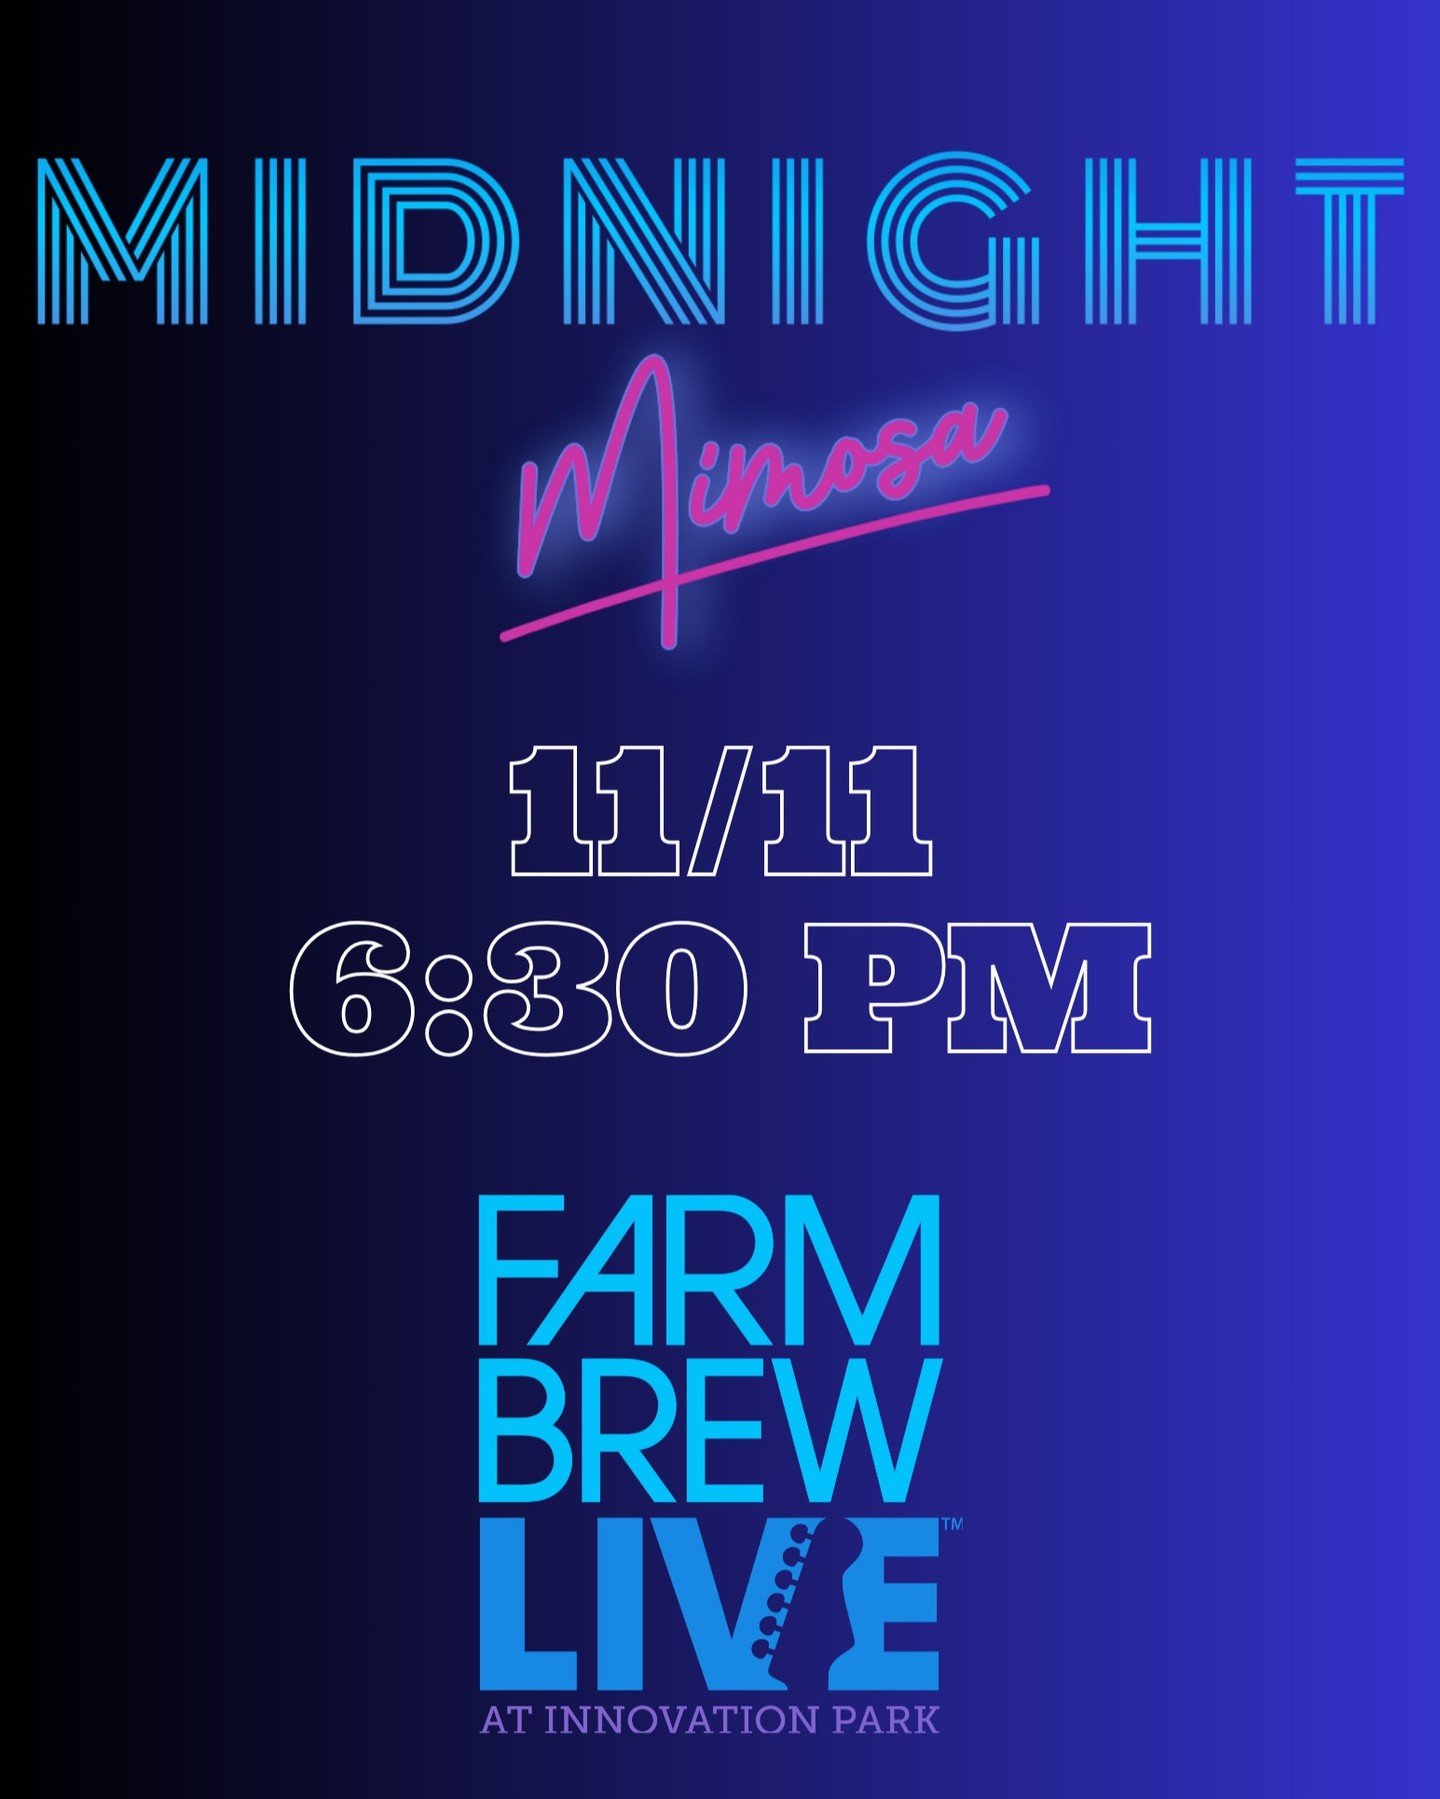 Tonight at @farmbrewlive! See you in the Pour House for good vibes and good beer. Octoberfest is over but Novemberfest is a thing, we swear. #1111makeawish